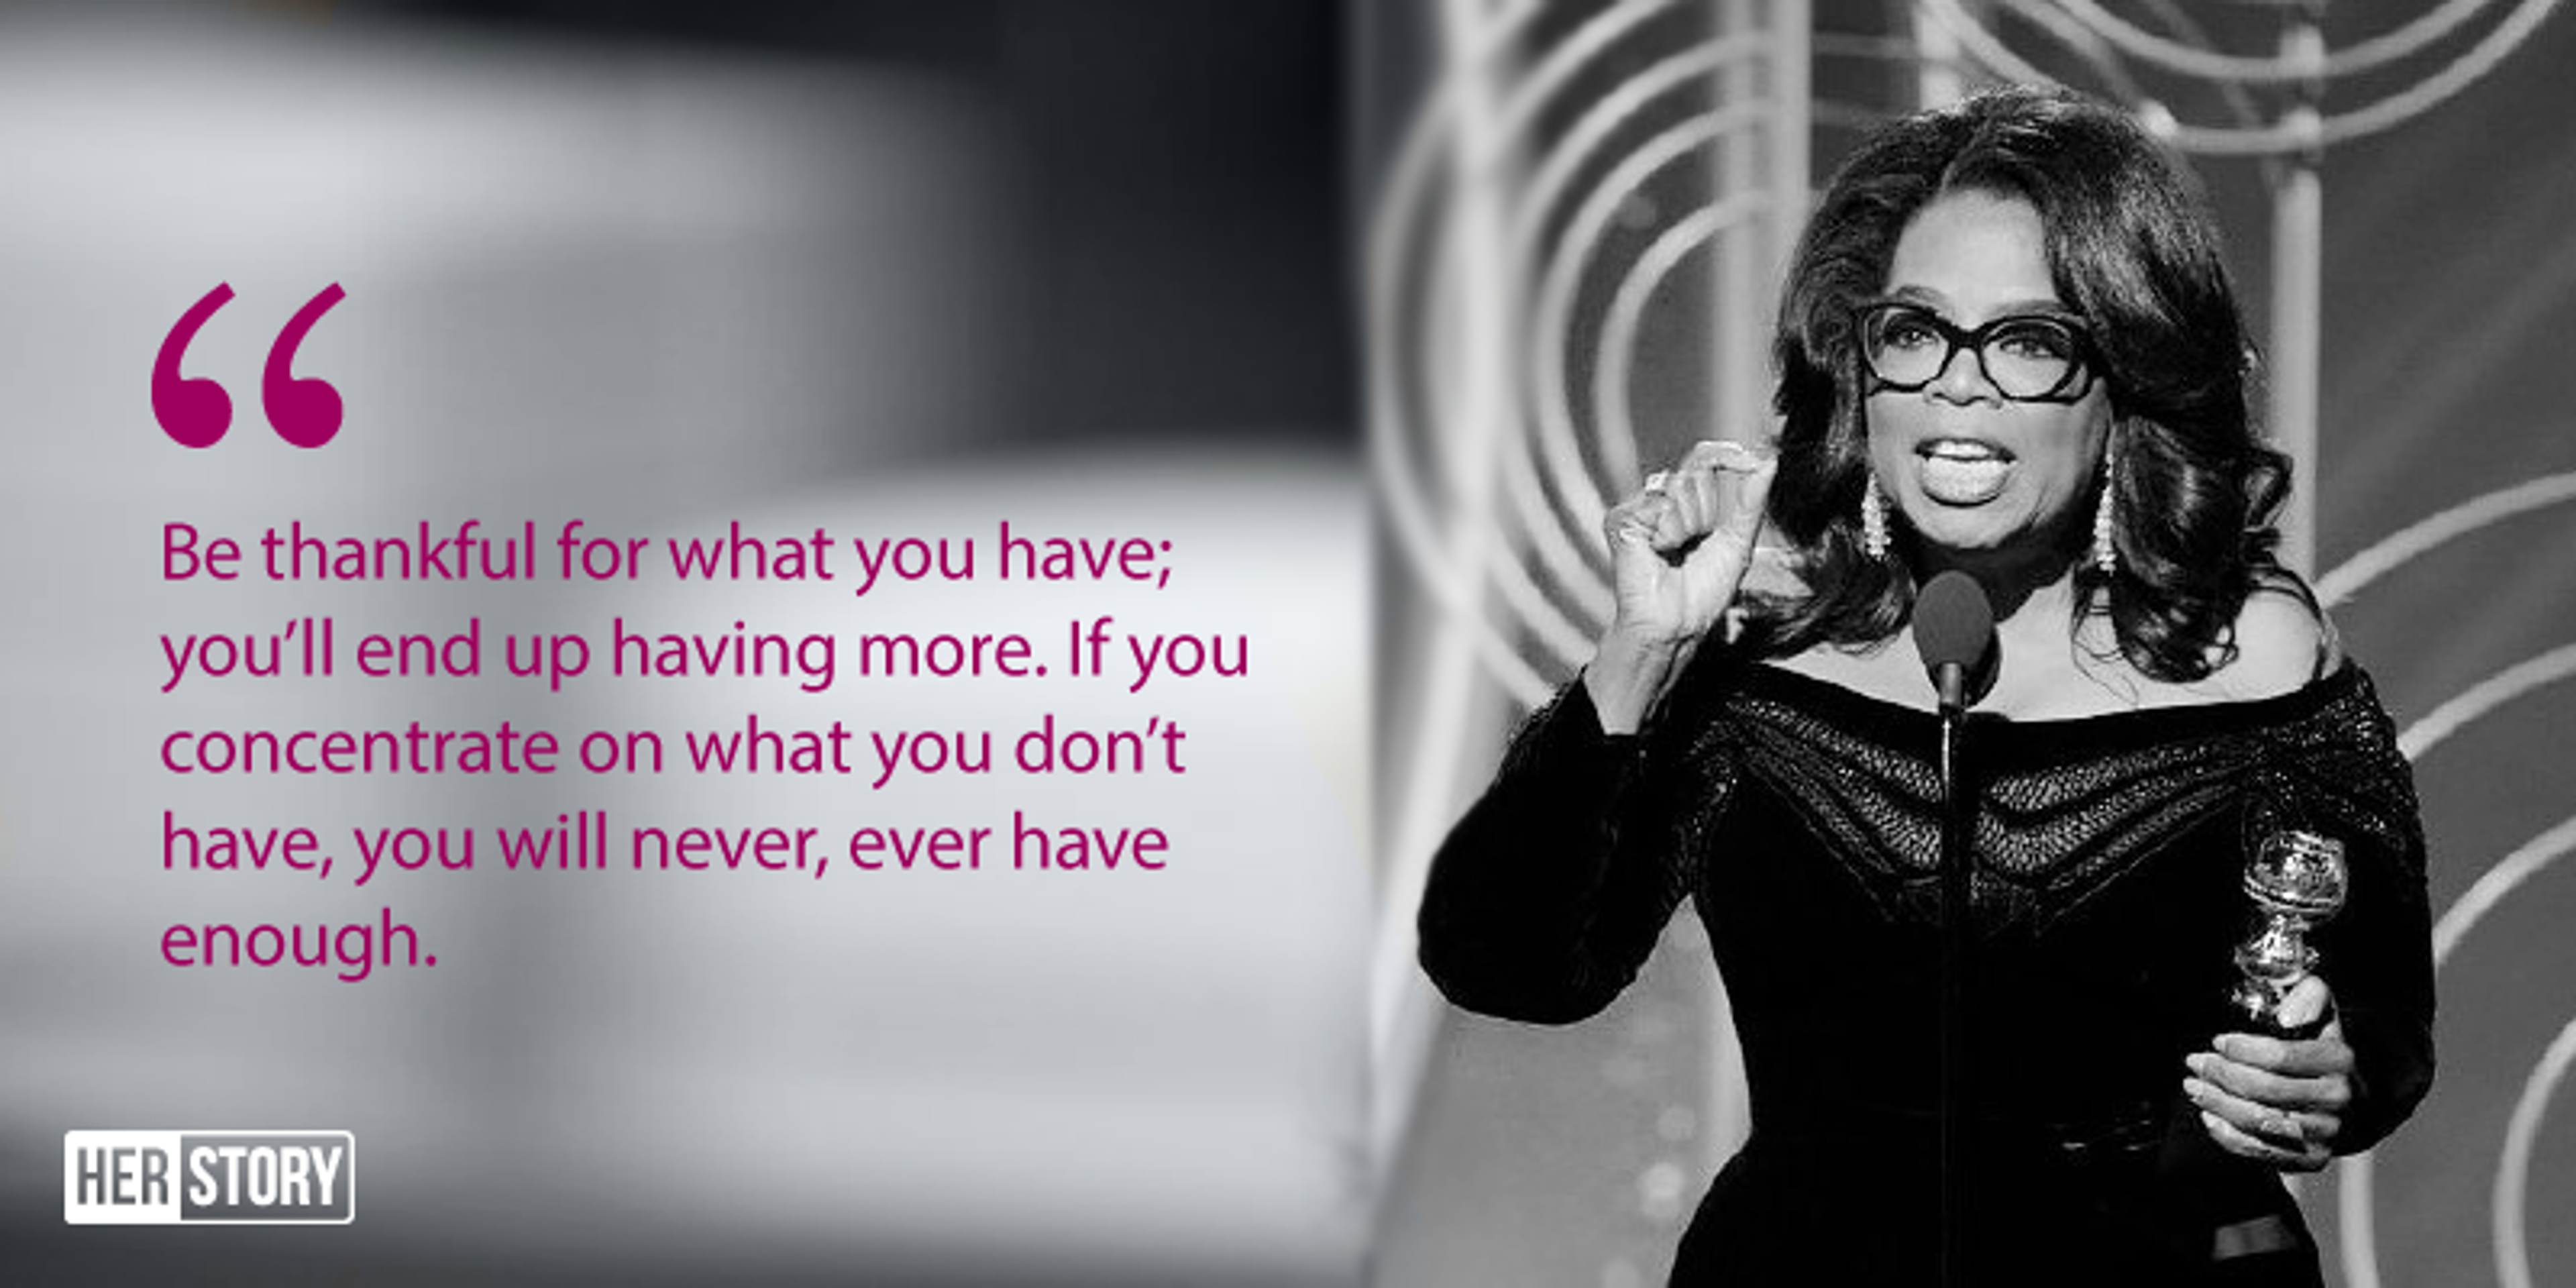 Oprah Winfrey and the Glamour of Misery